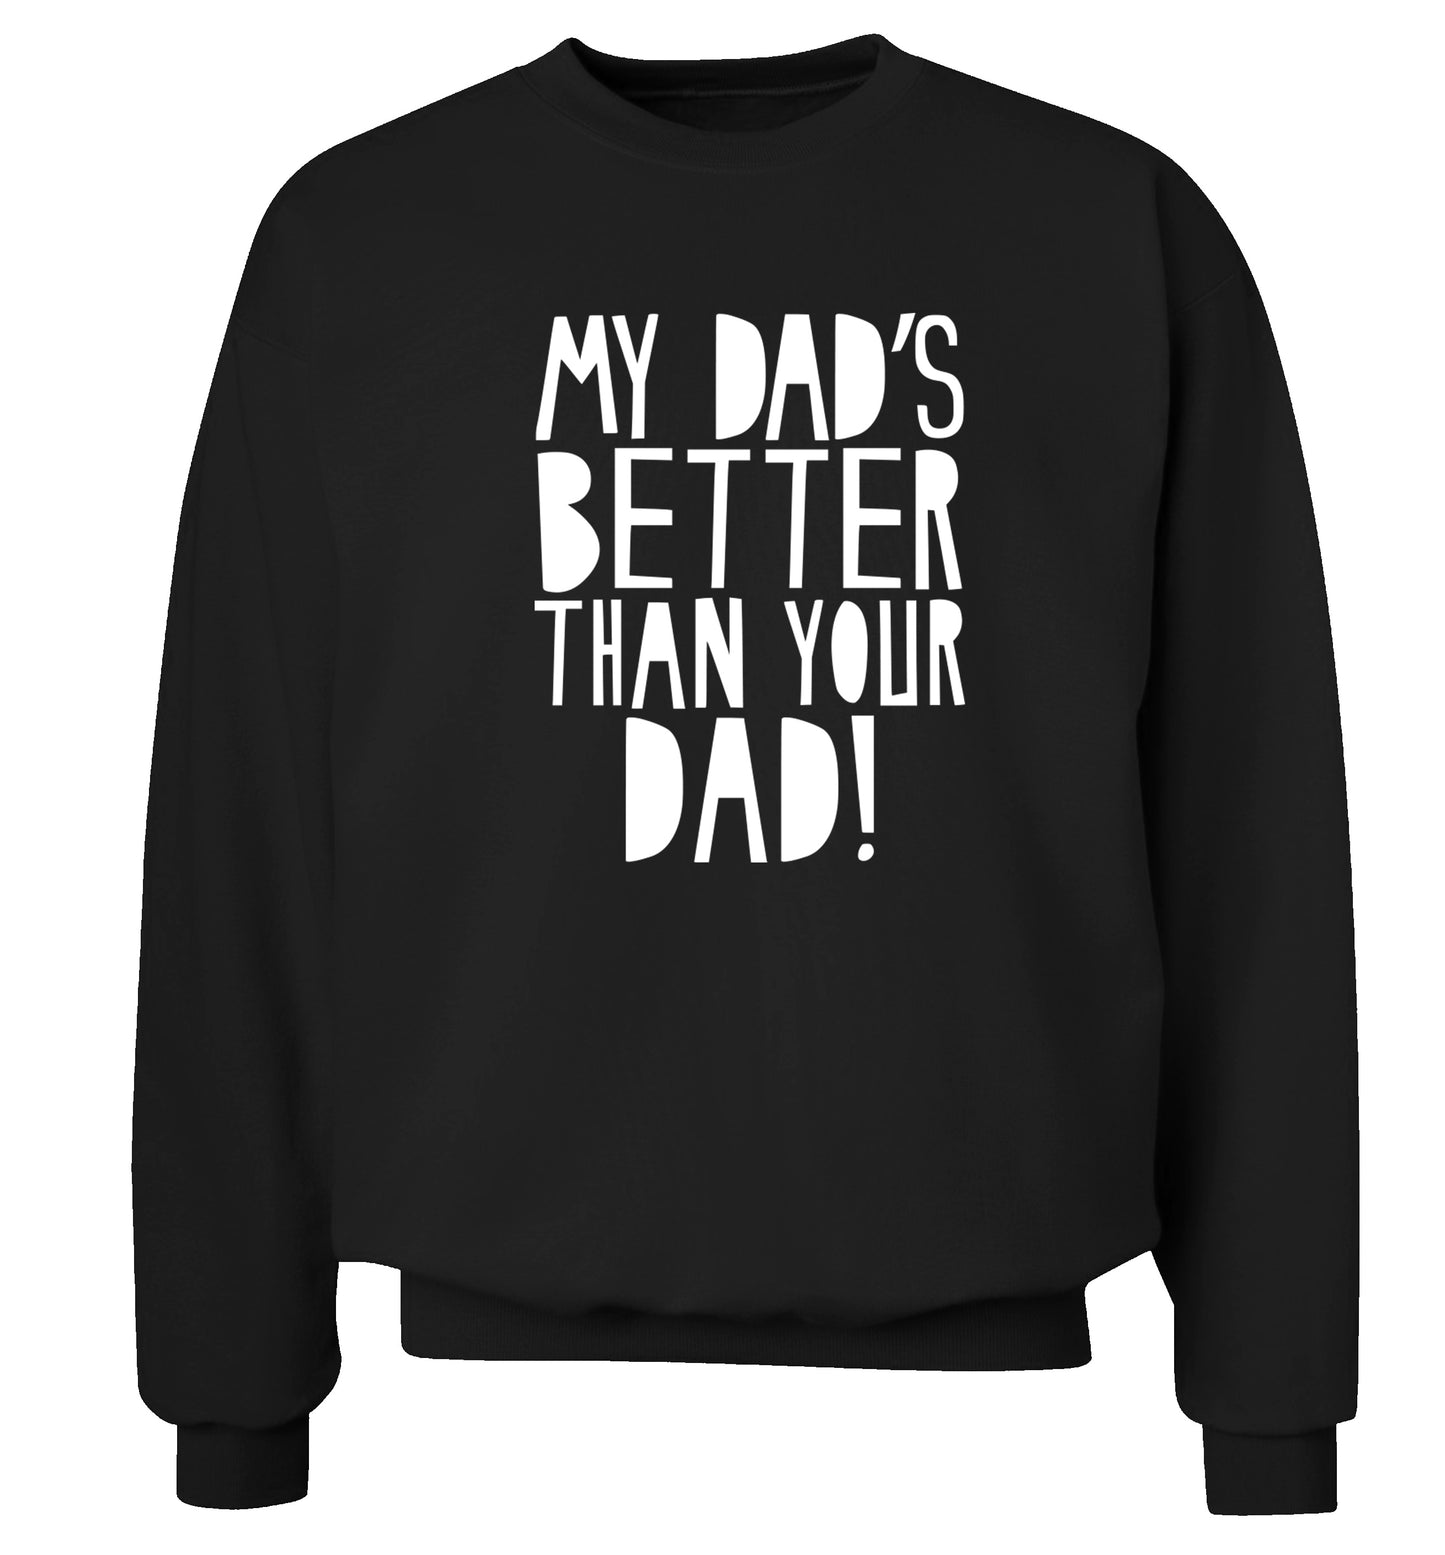 My dad's better than your dad Adult's unisex black Sweater 2XL